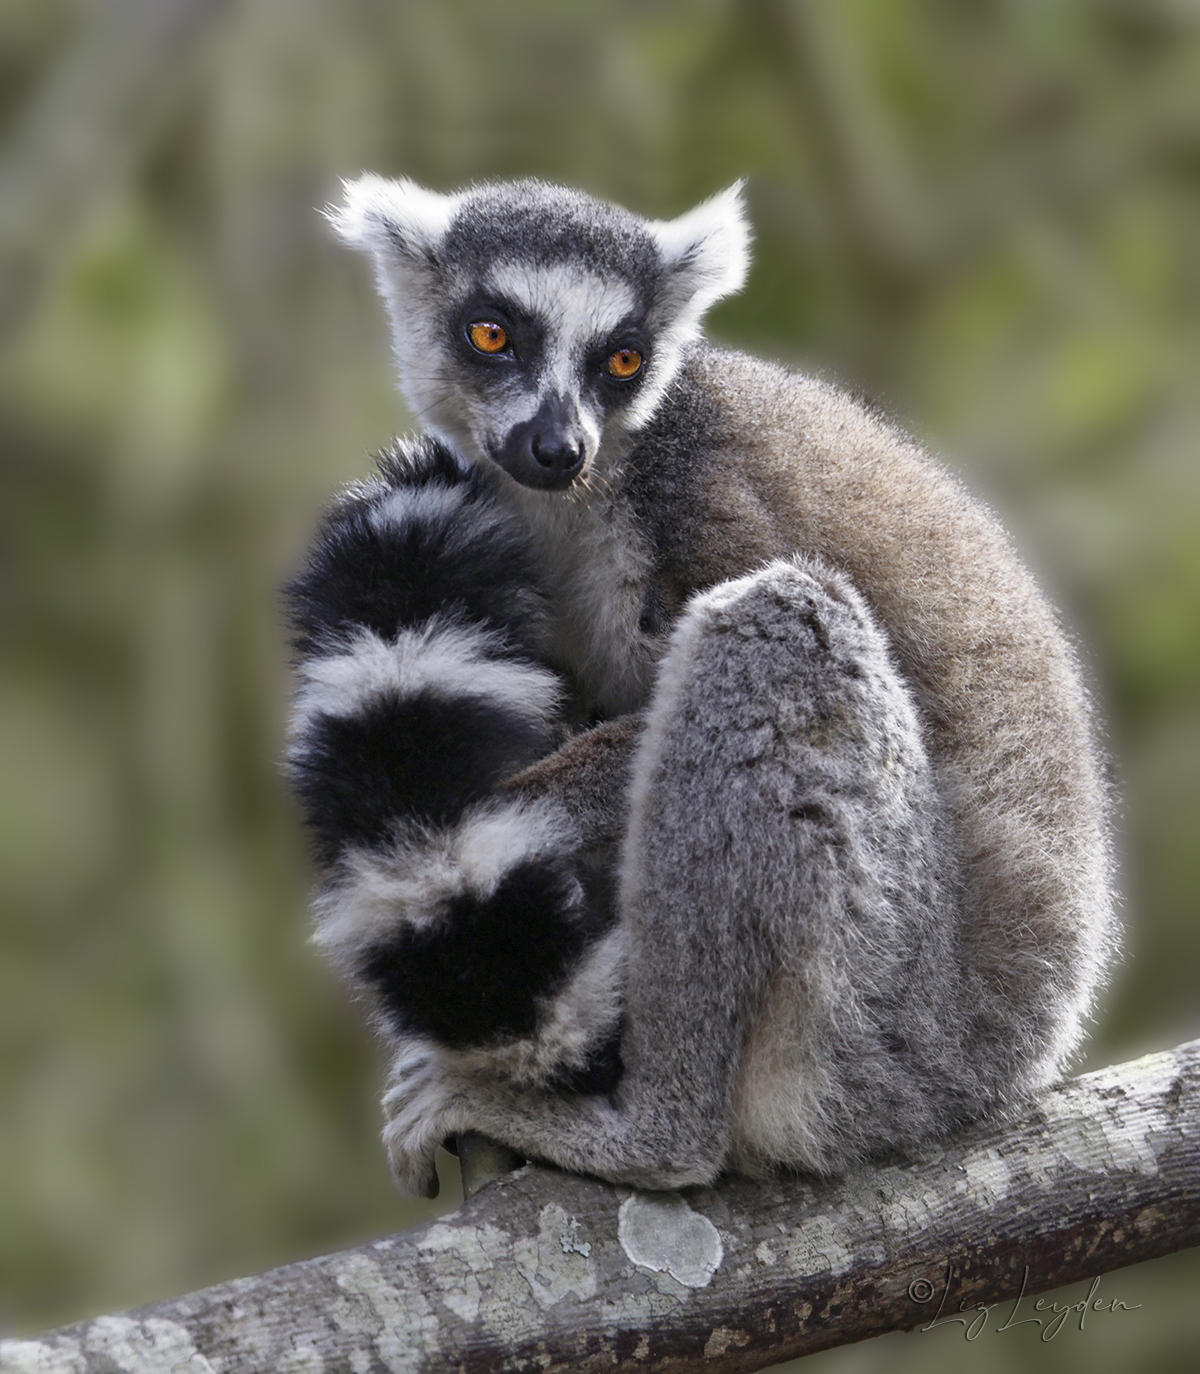 ring tailed lemur's tail is so long #animals #shorts #wildanimals - YouTube